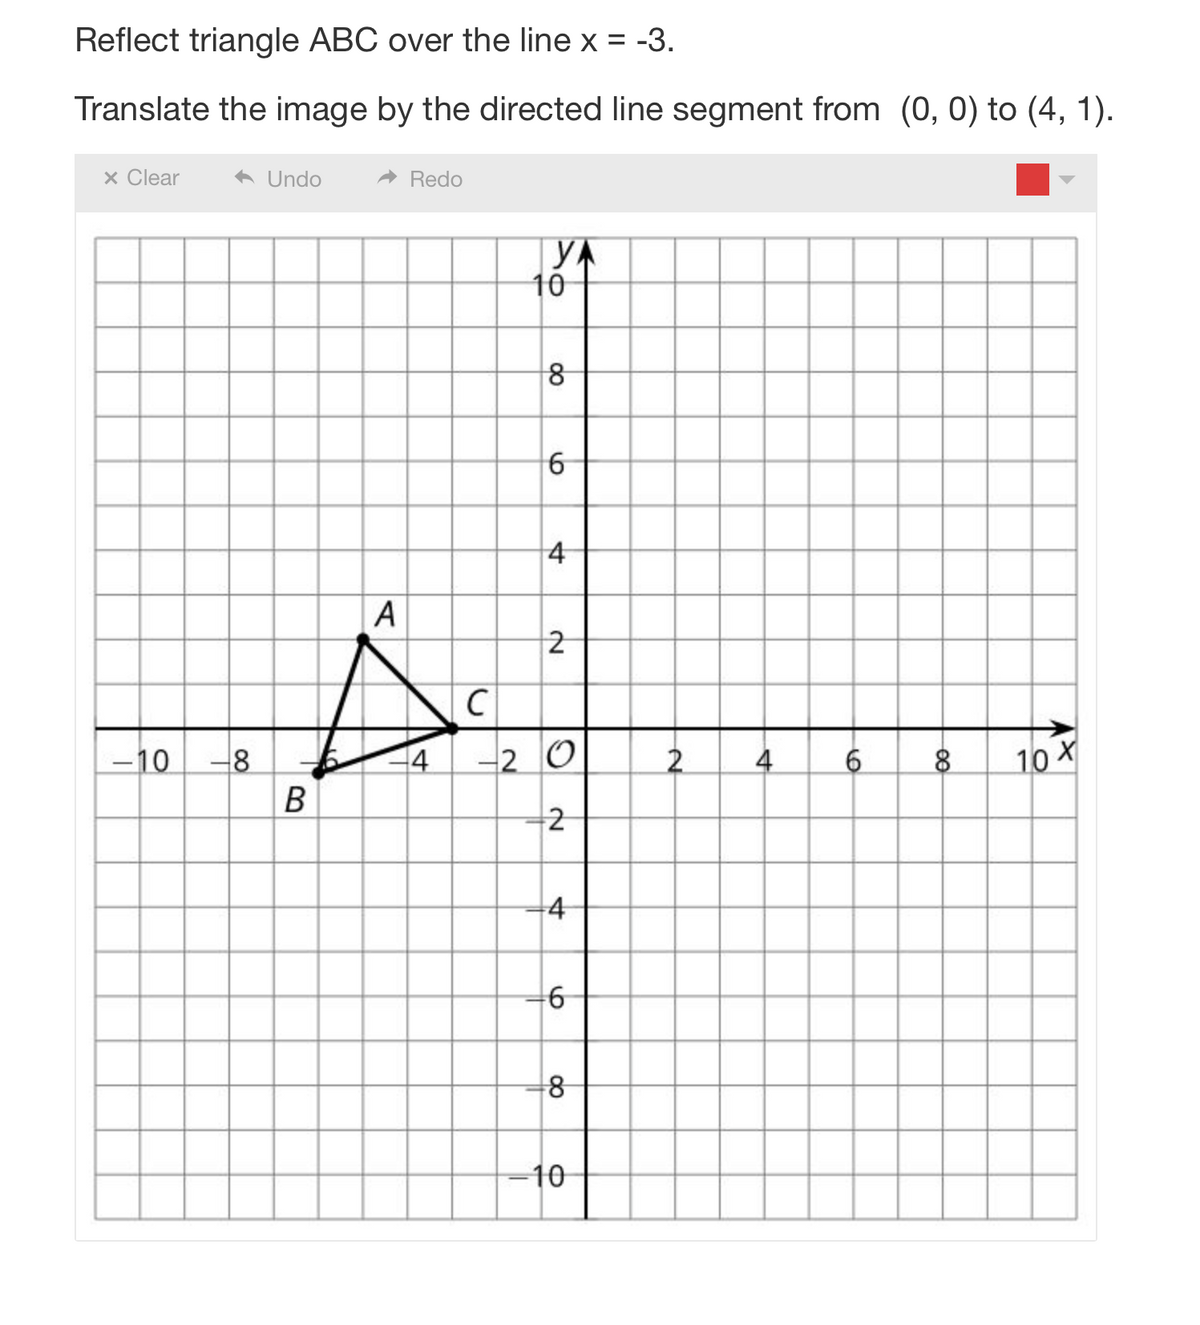 Reflect triangle ABC over the line x = -3.
Translate the image by the directed line segment from (0, 0) to (4, 1).
x Clear
-10
-8
Undo
Redo
A
A
C
4
B
YA
10
8
6
4
2
-20
2
4
6
8
-10
2
4
6
8
10 X